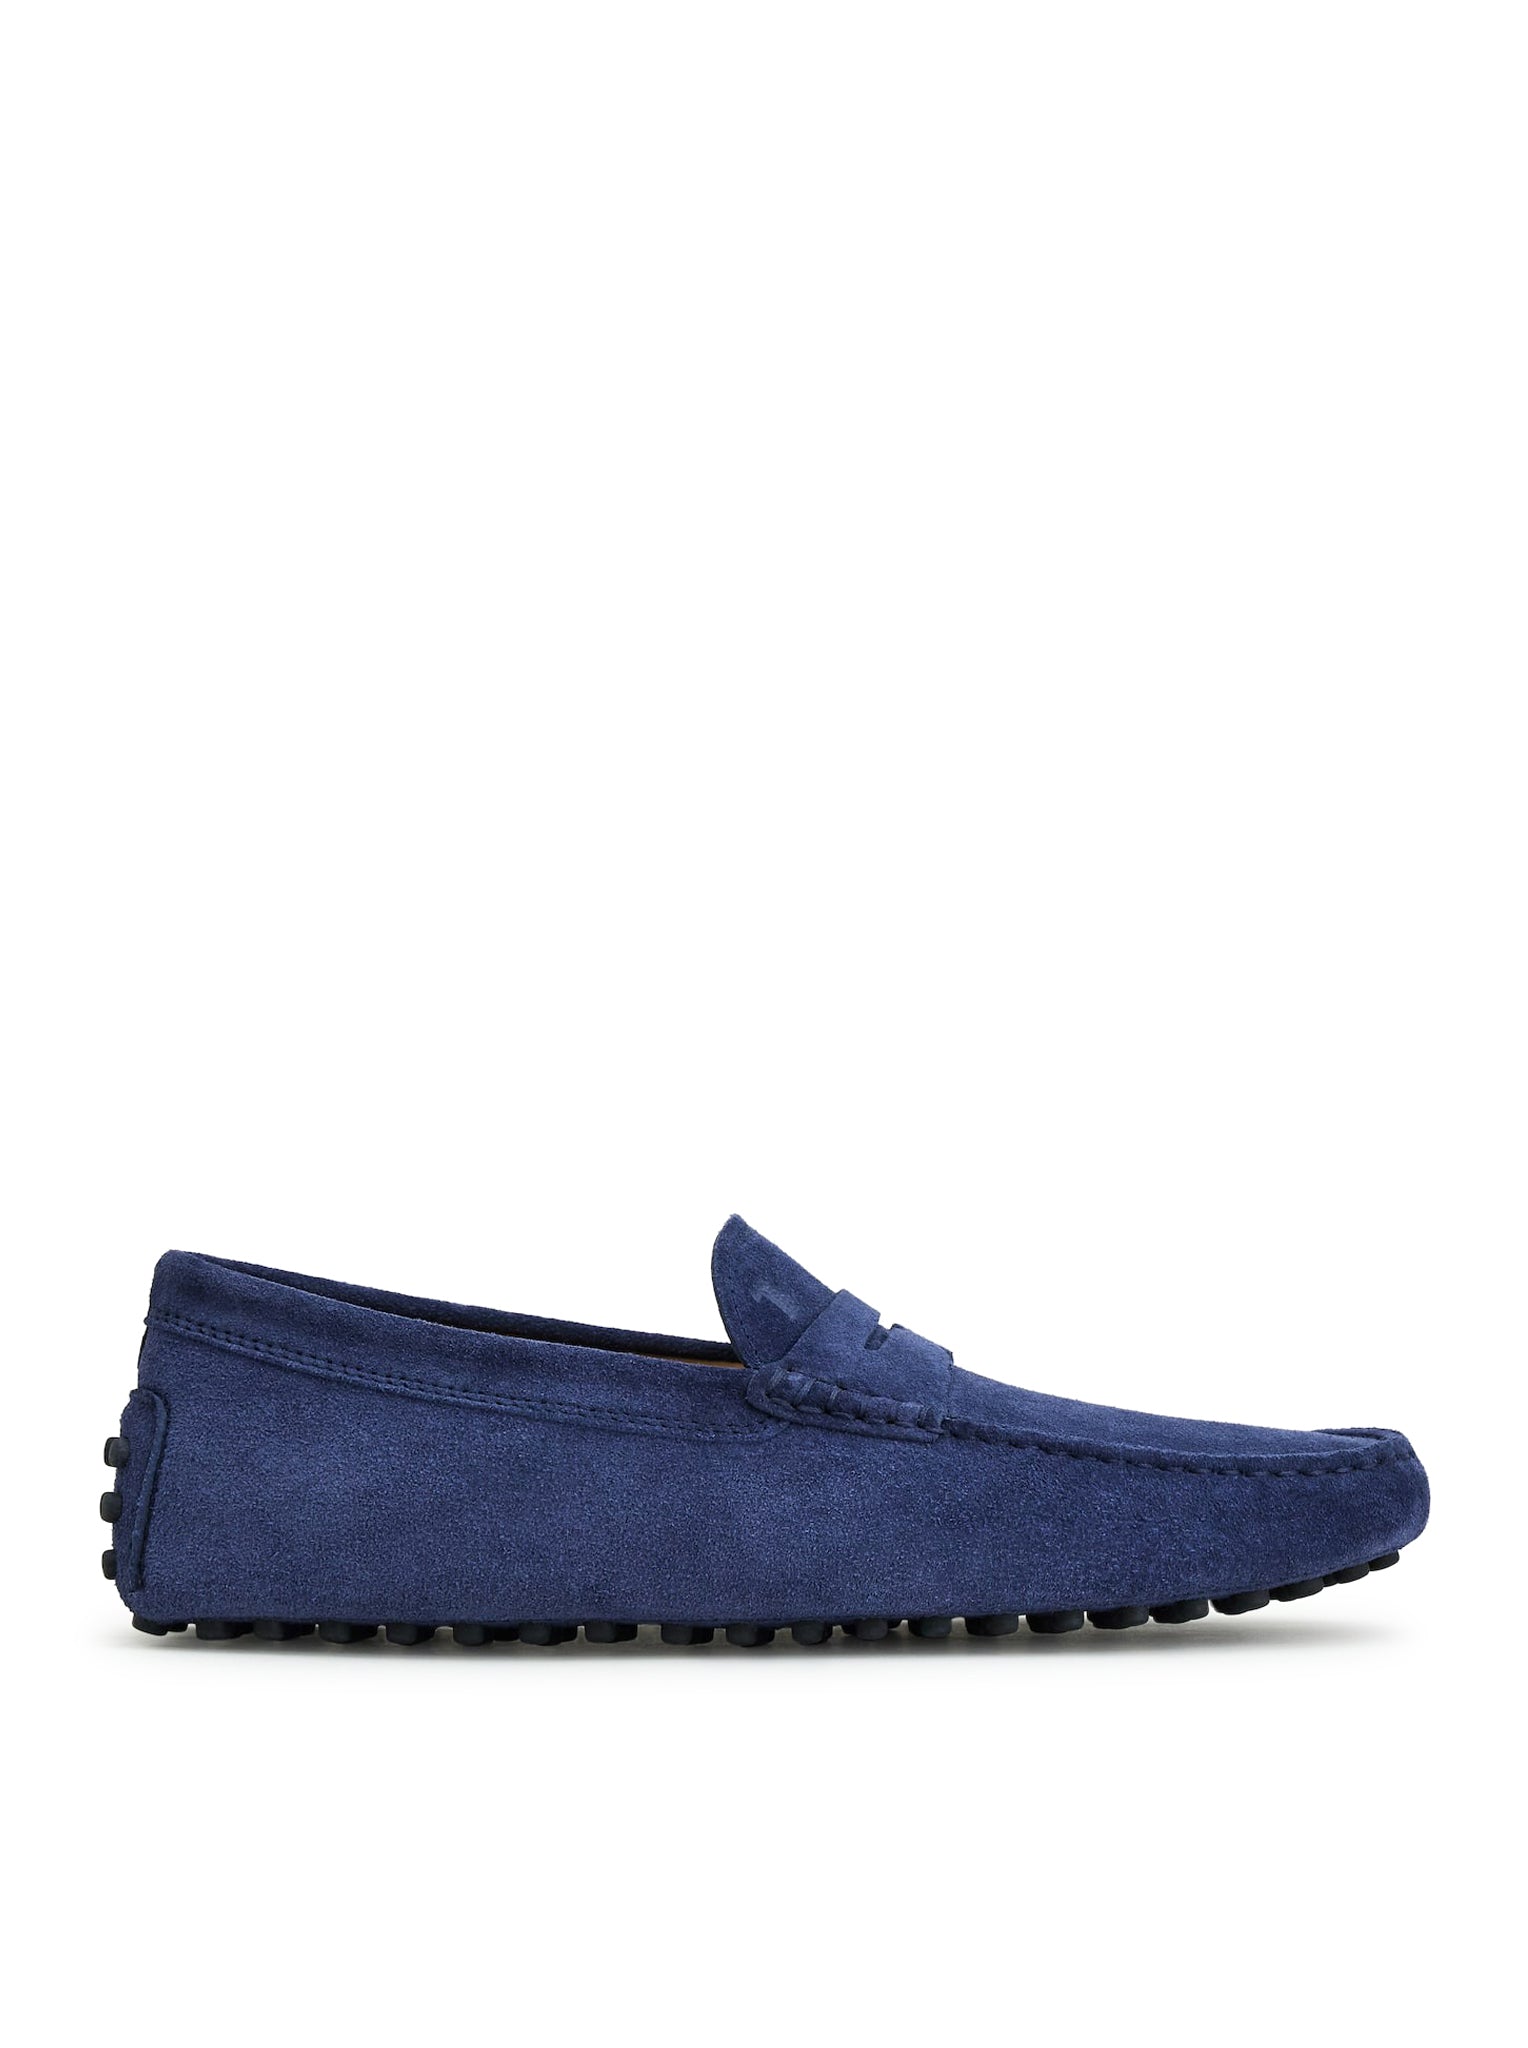 Gommino Moccasin in Suede